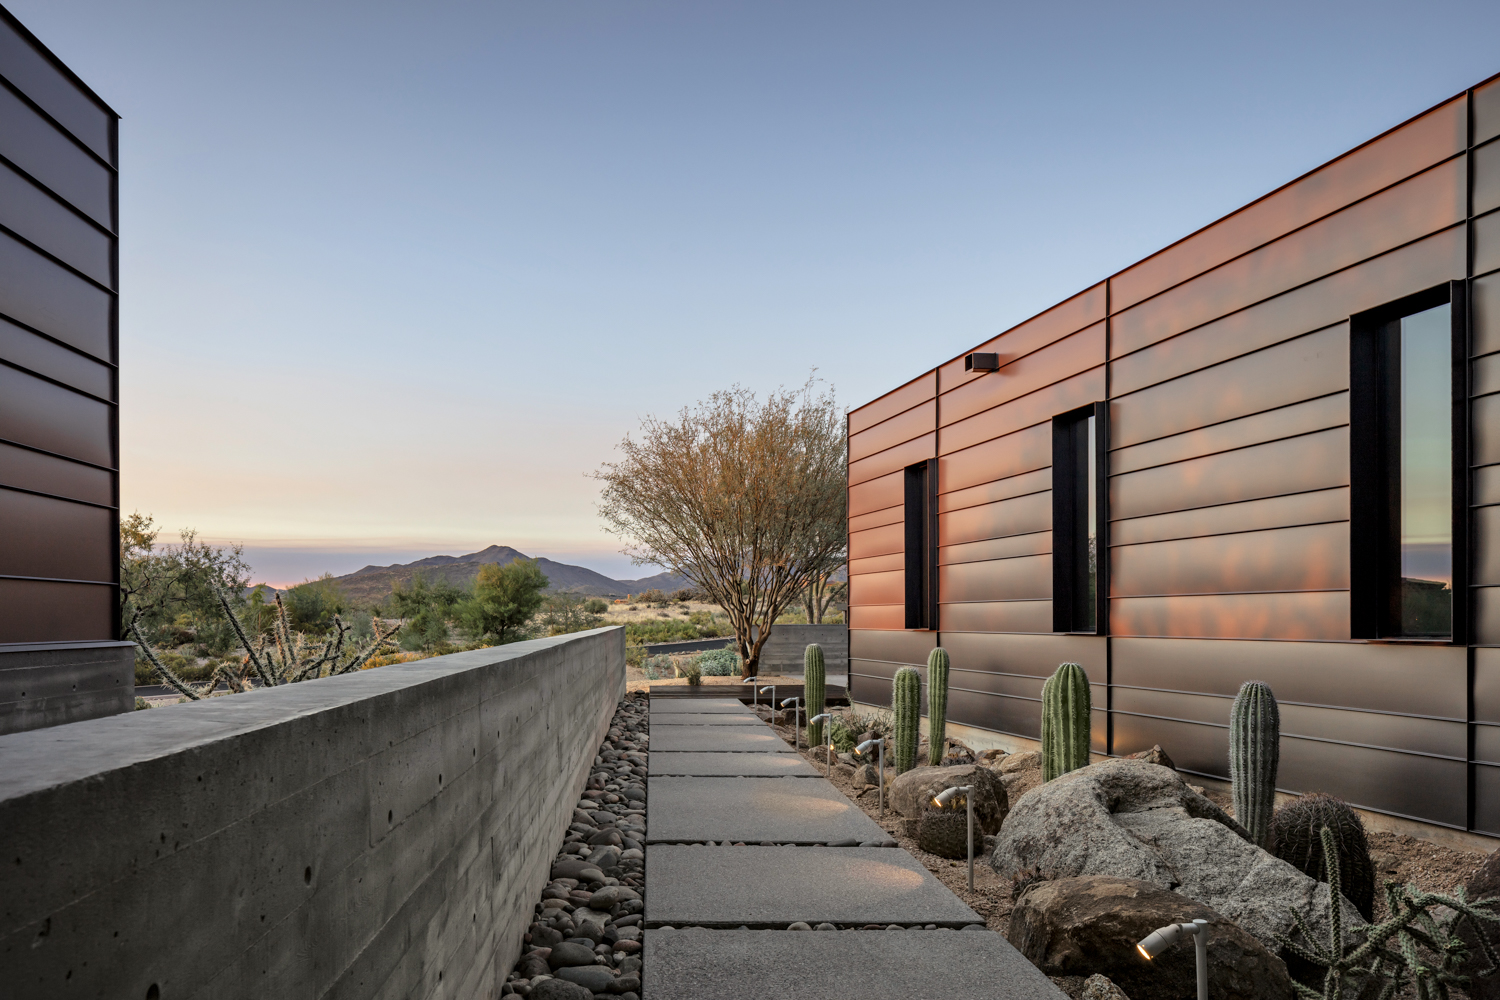 A walkway alongside a metal-clad house. There are cacti lining the walkway.